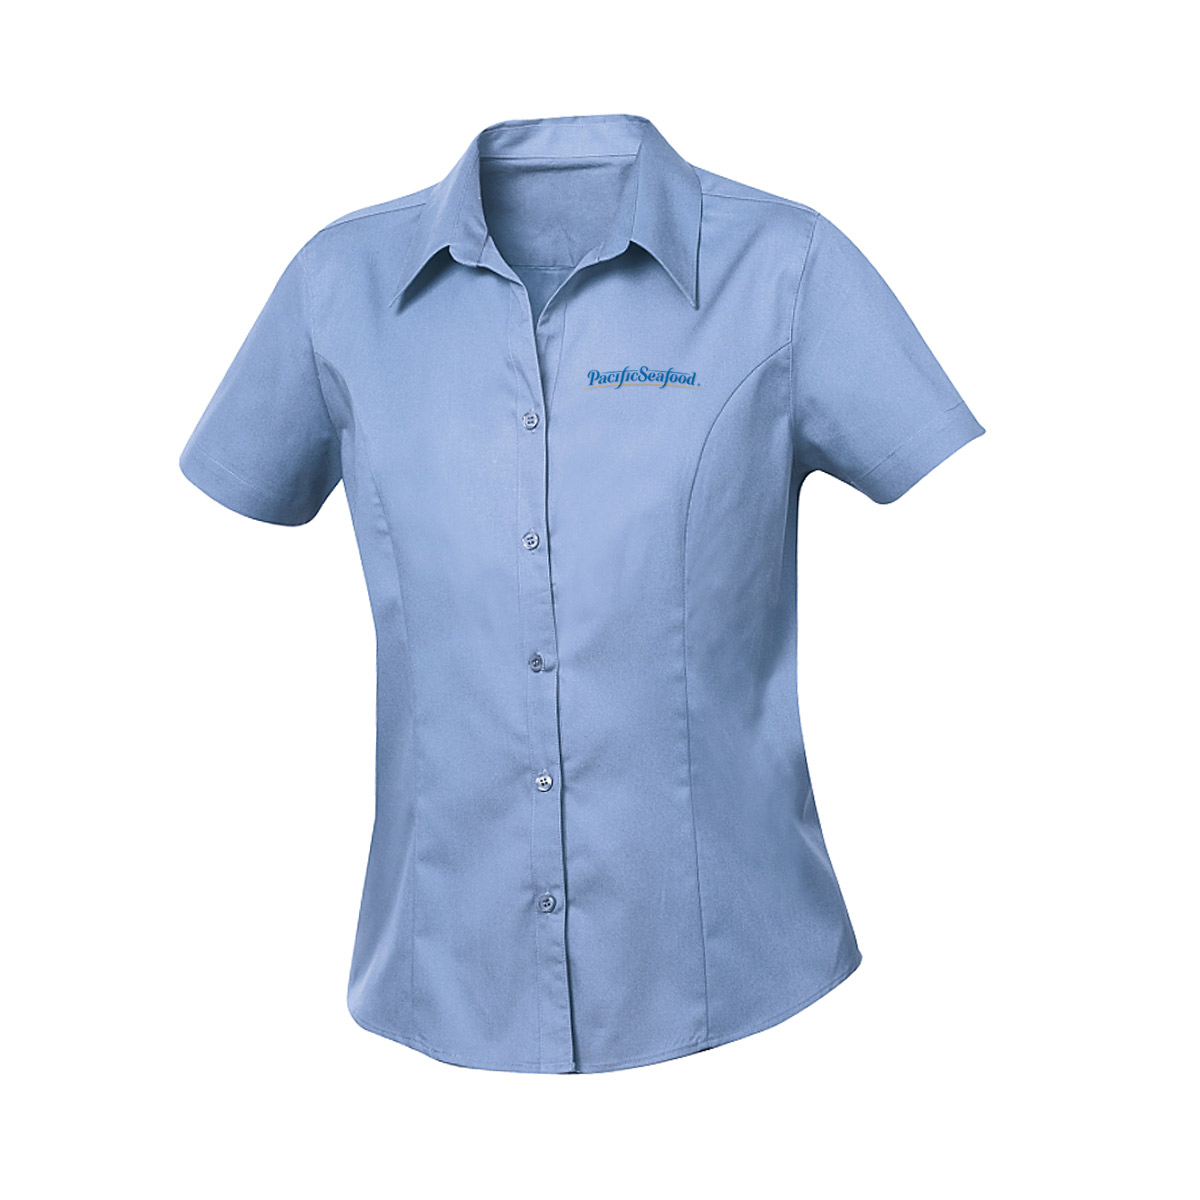 Ladies Short Sleeved Caitlin Twill | Pacificseafood: Corp